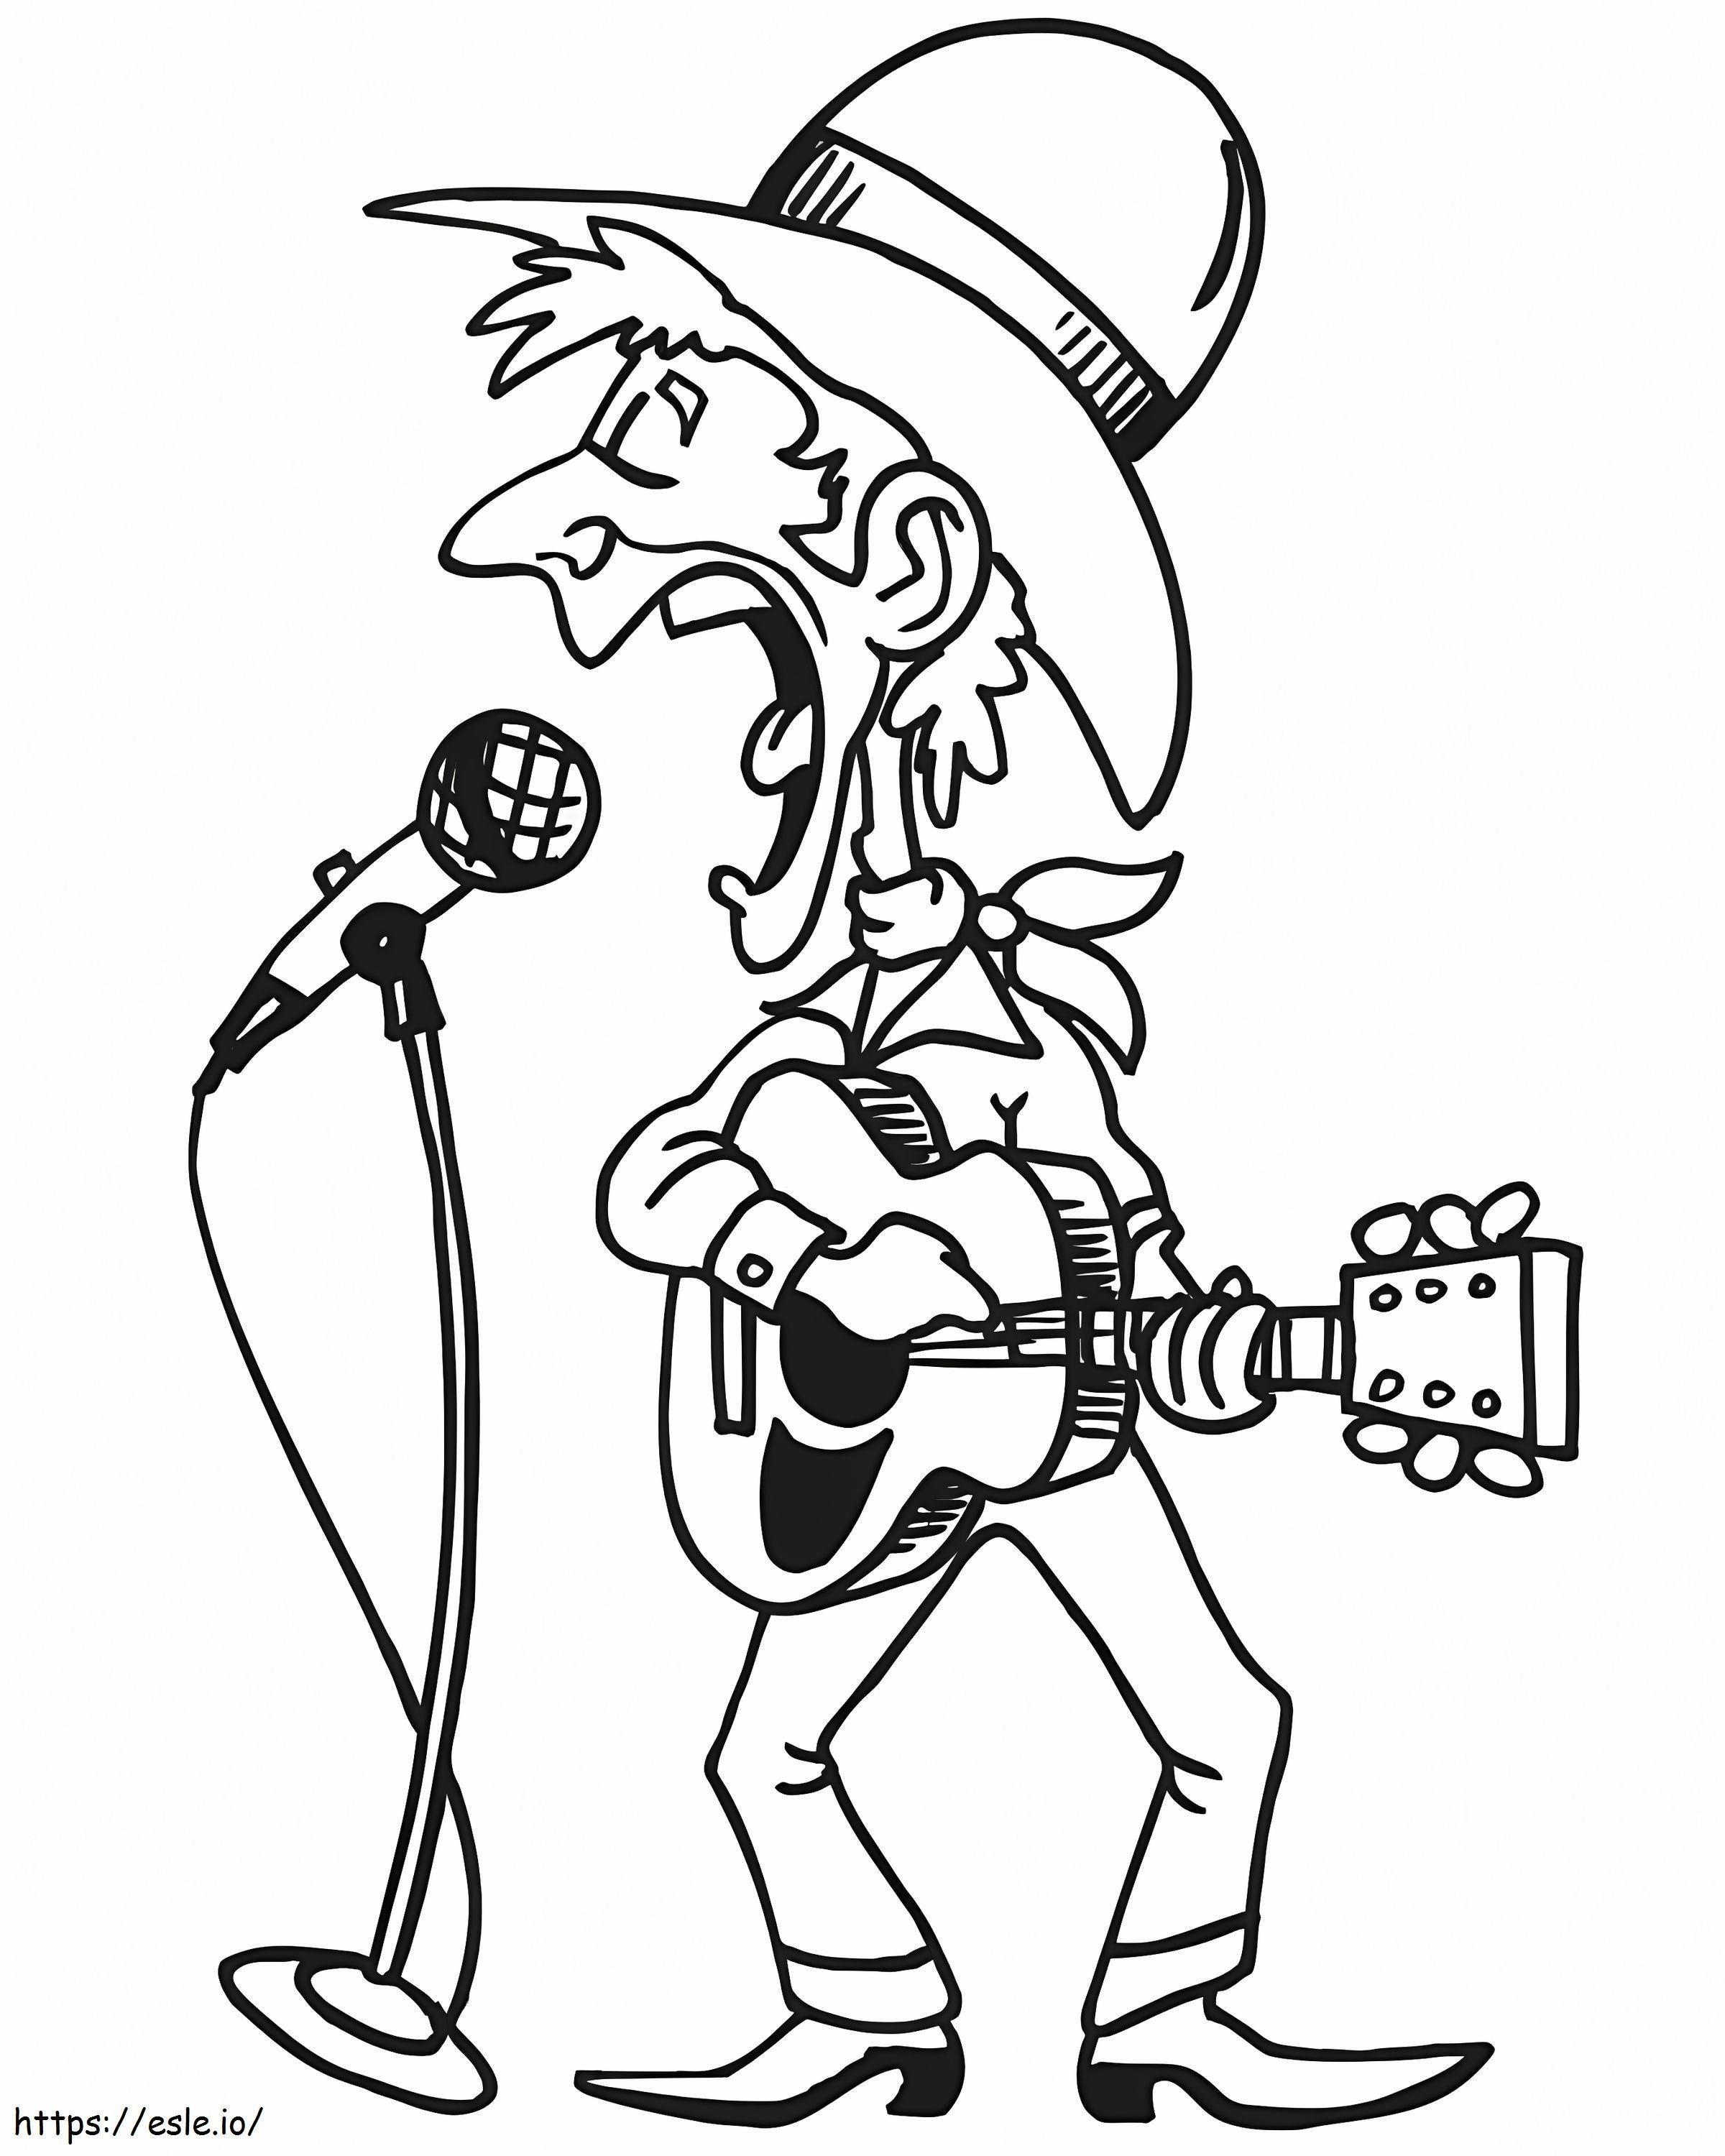 Country Singer coloring page